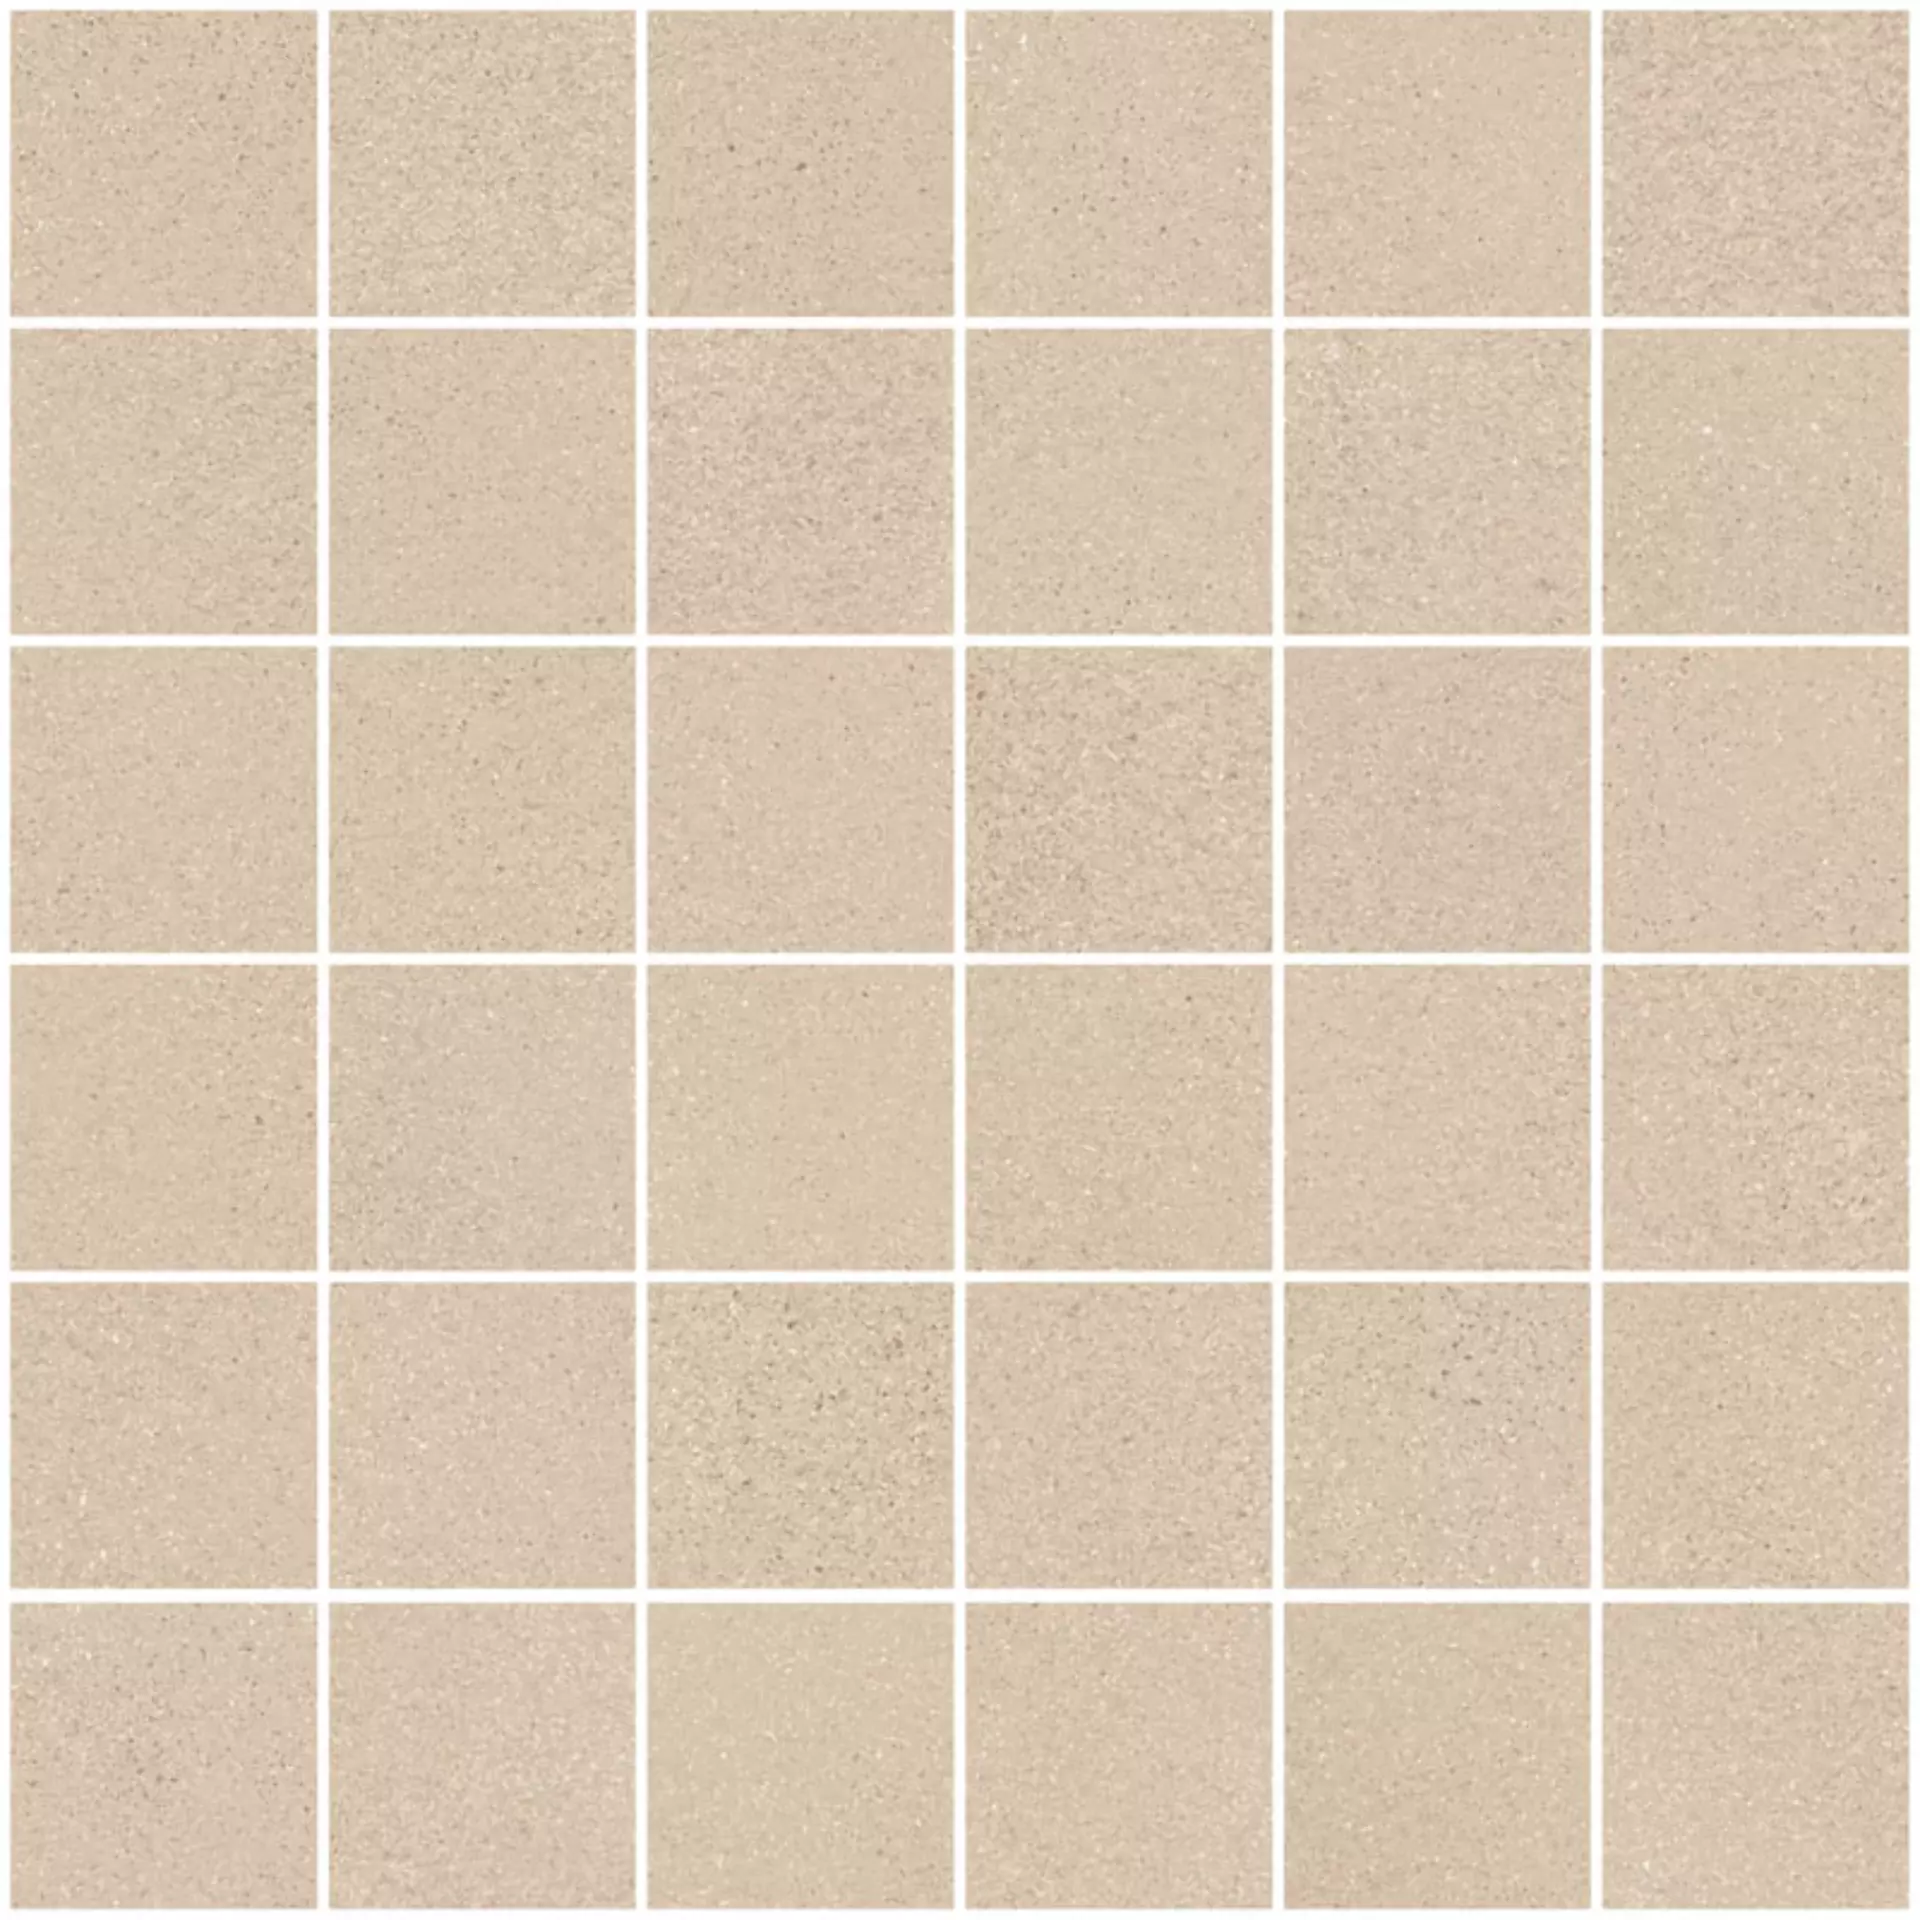 Sant Agostino Sable Beige Natural Mosaic CSAMSABE30 30x30cm rectified 10mm